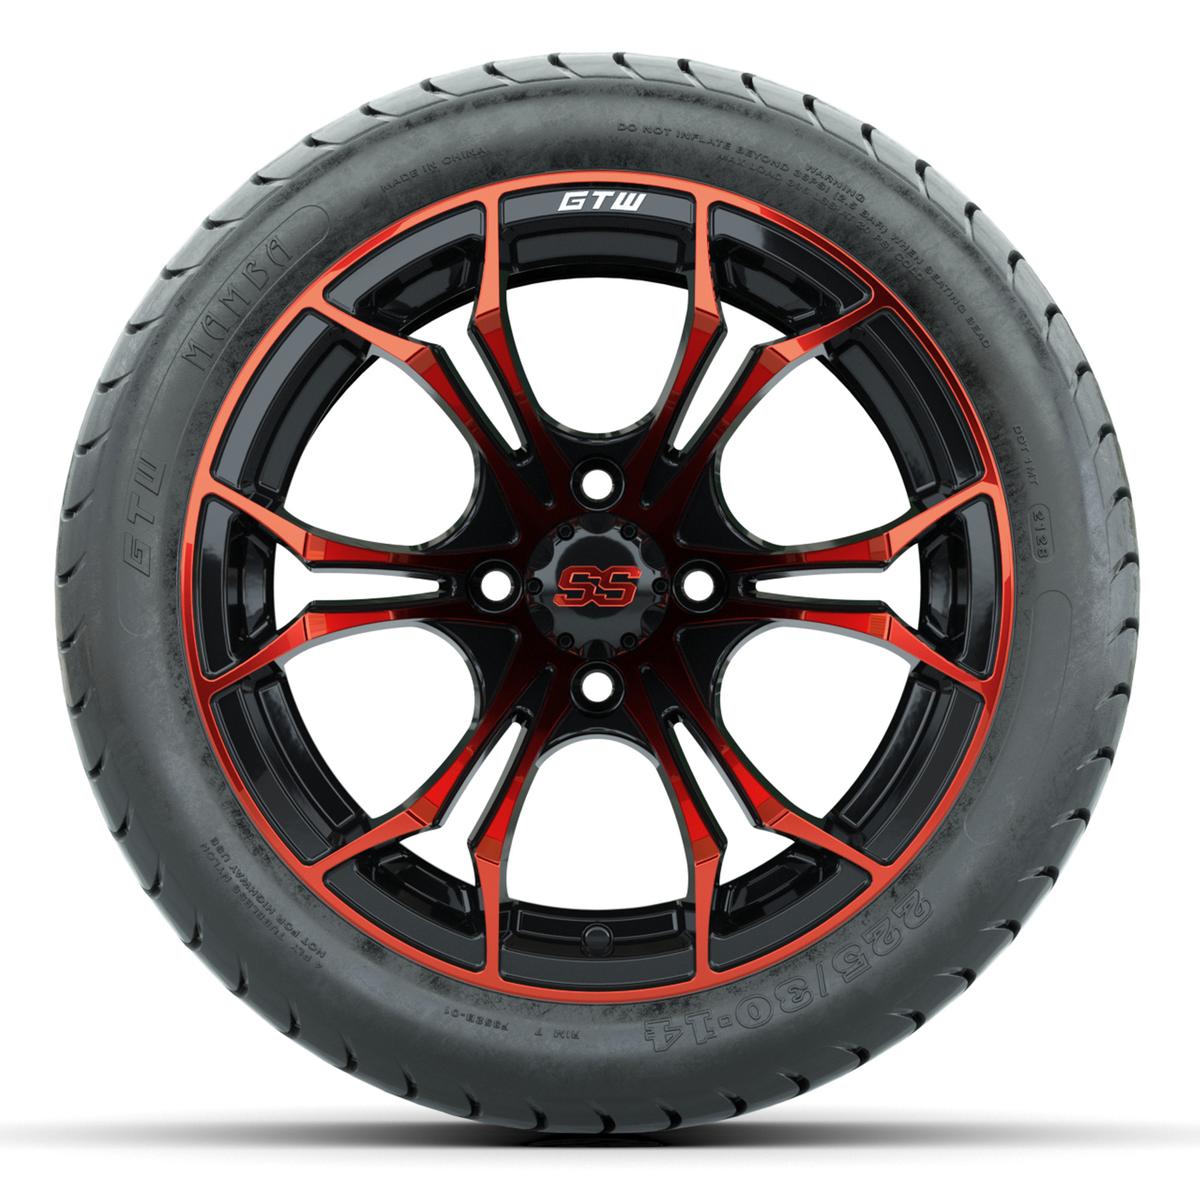 GTW Spyder Red/Black 14 in Wheels with 225/30-14 Mamba Street Tires – Full Set